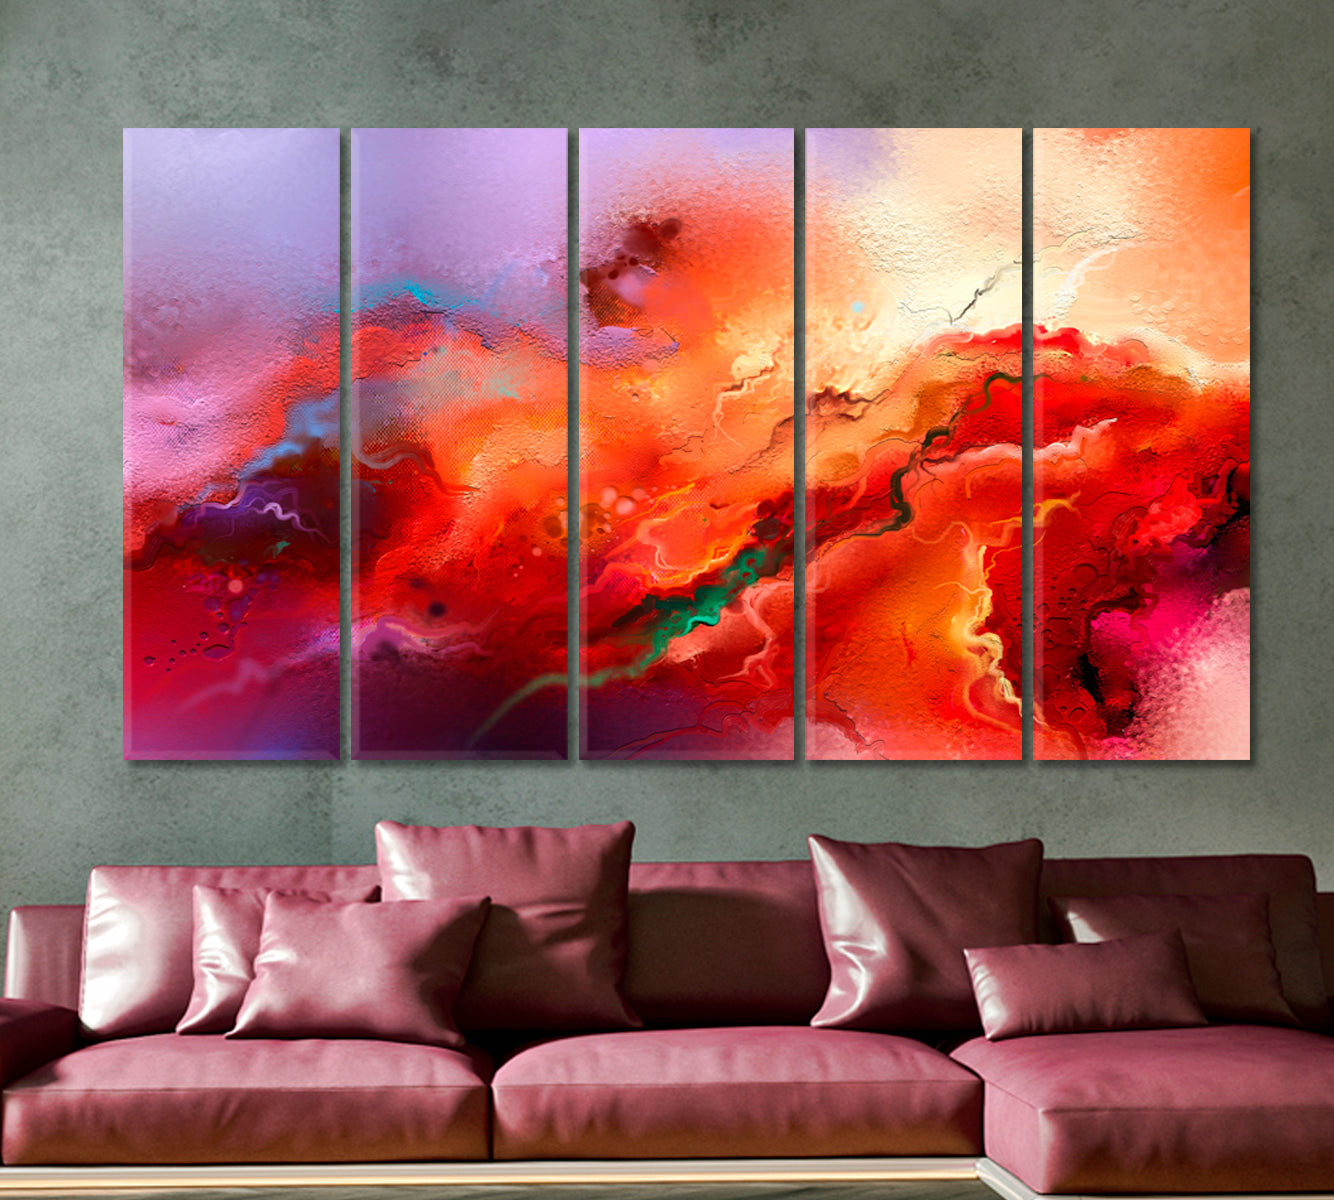 Paint Strokes Bright Abstract Design Abstract Art Print Artesty 5 panels 36" x 24" 